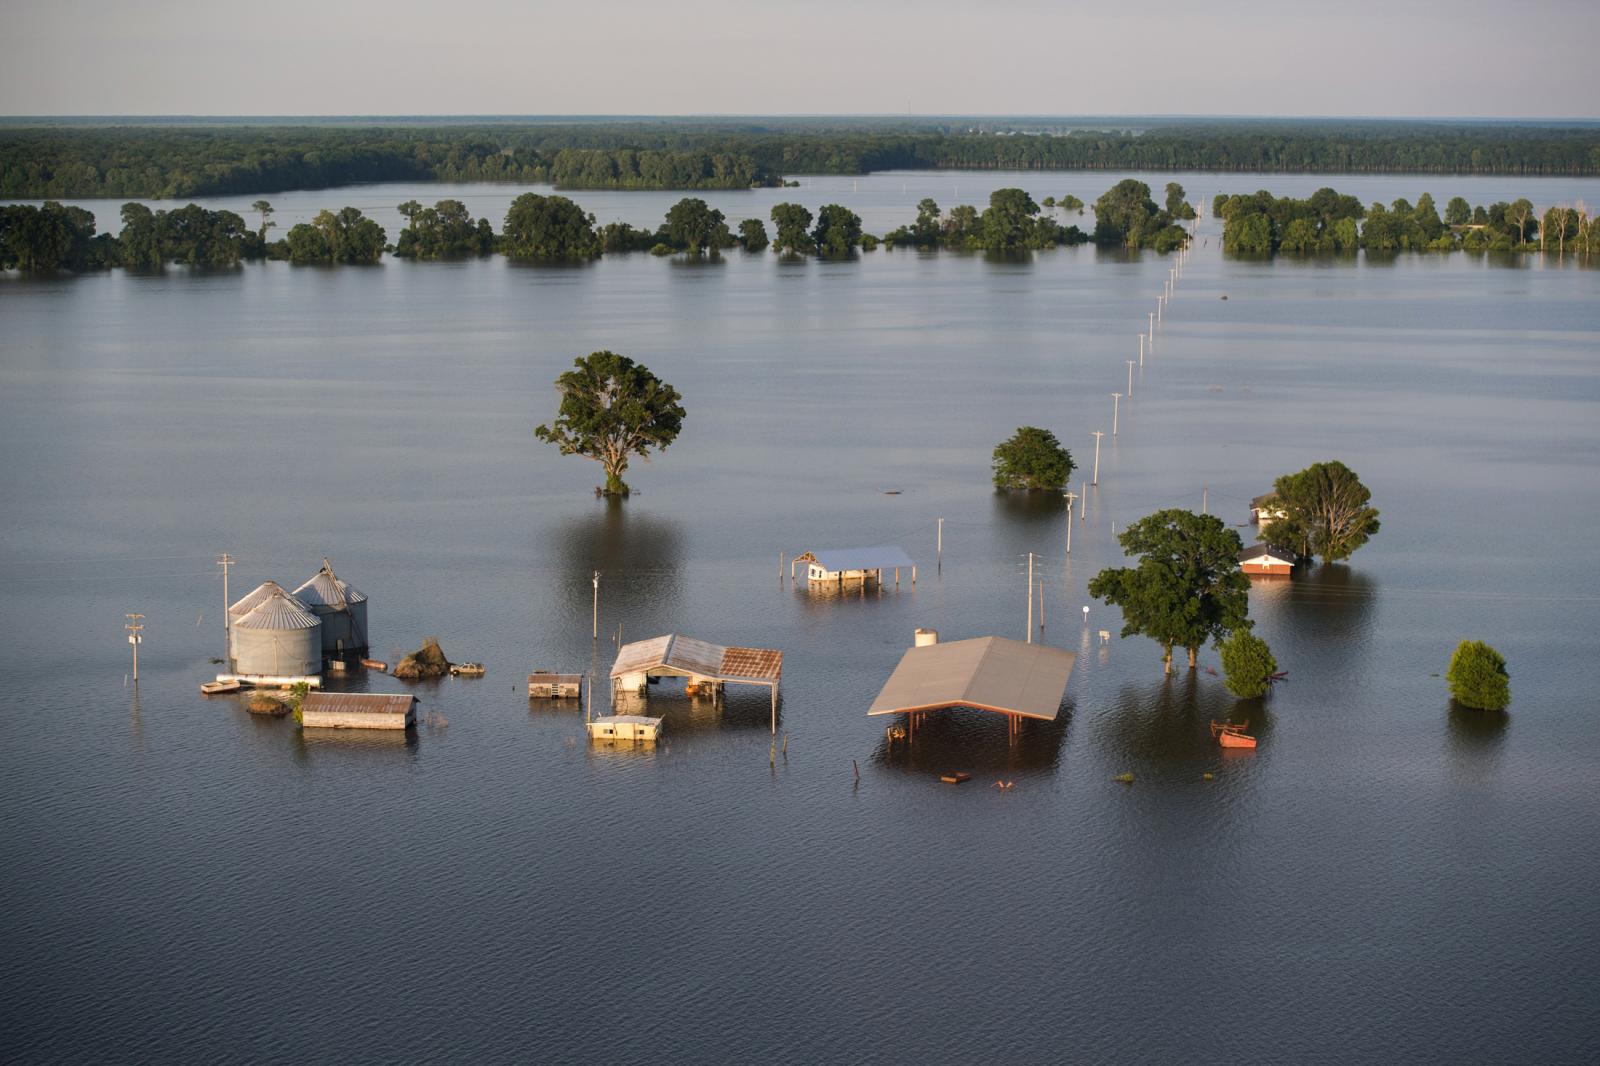 Backwater flooding surrounds a ...14, 2019. (Photo by Rory Doyle)